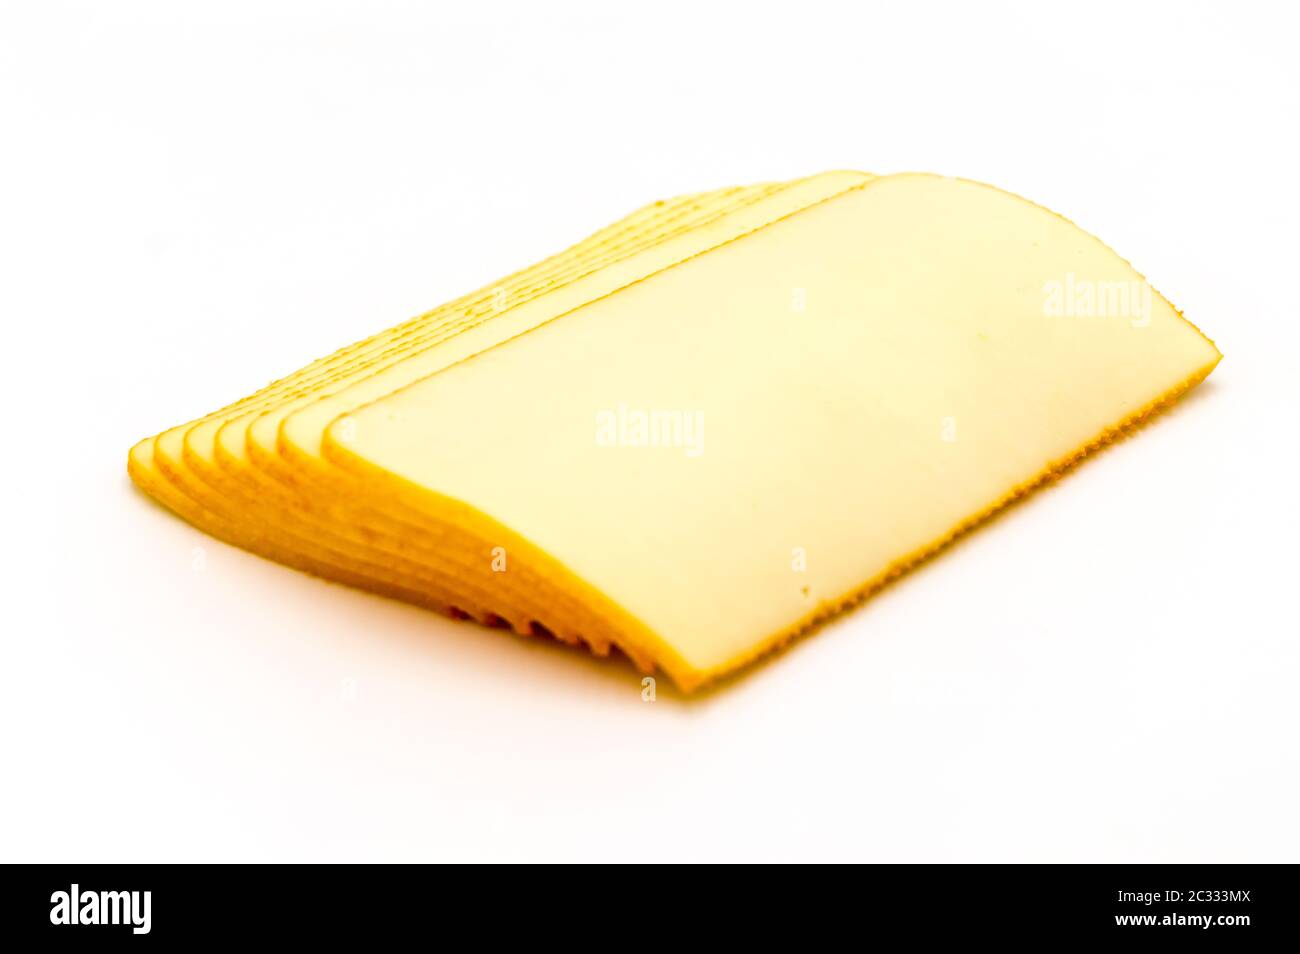 Cheese slices isolated on white background Stock Photo